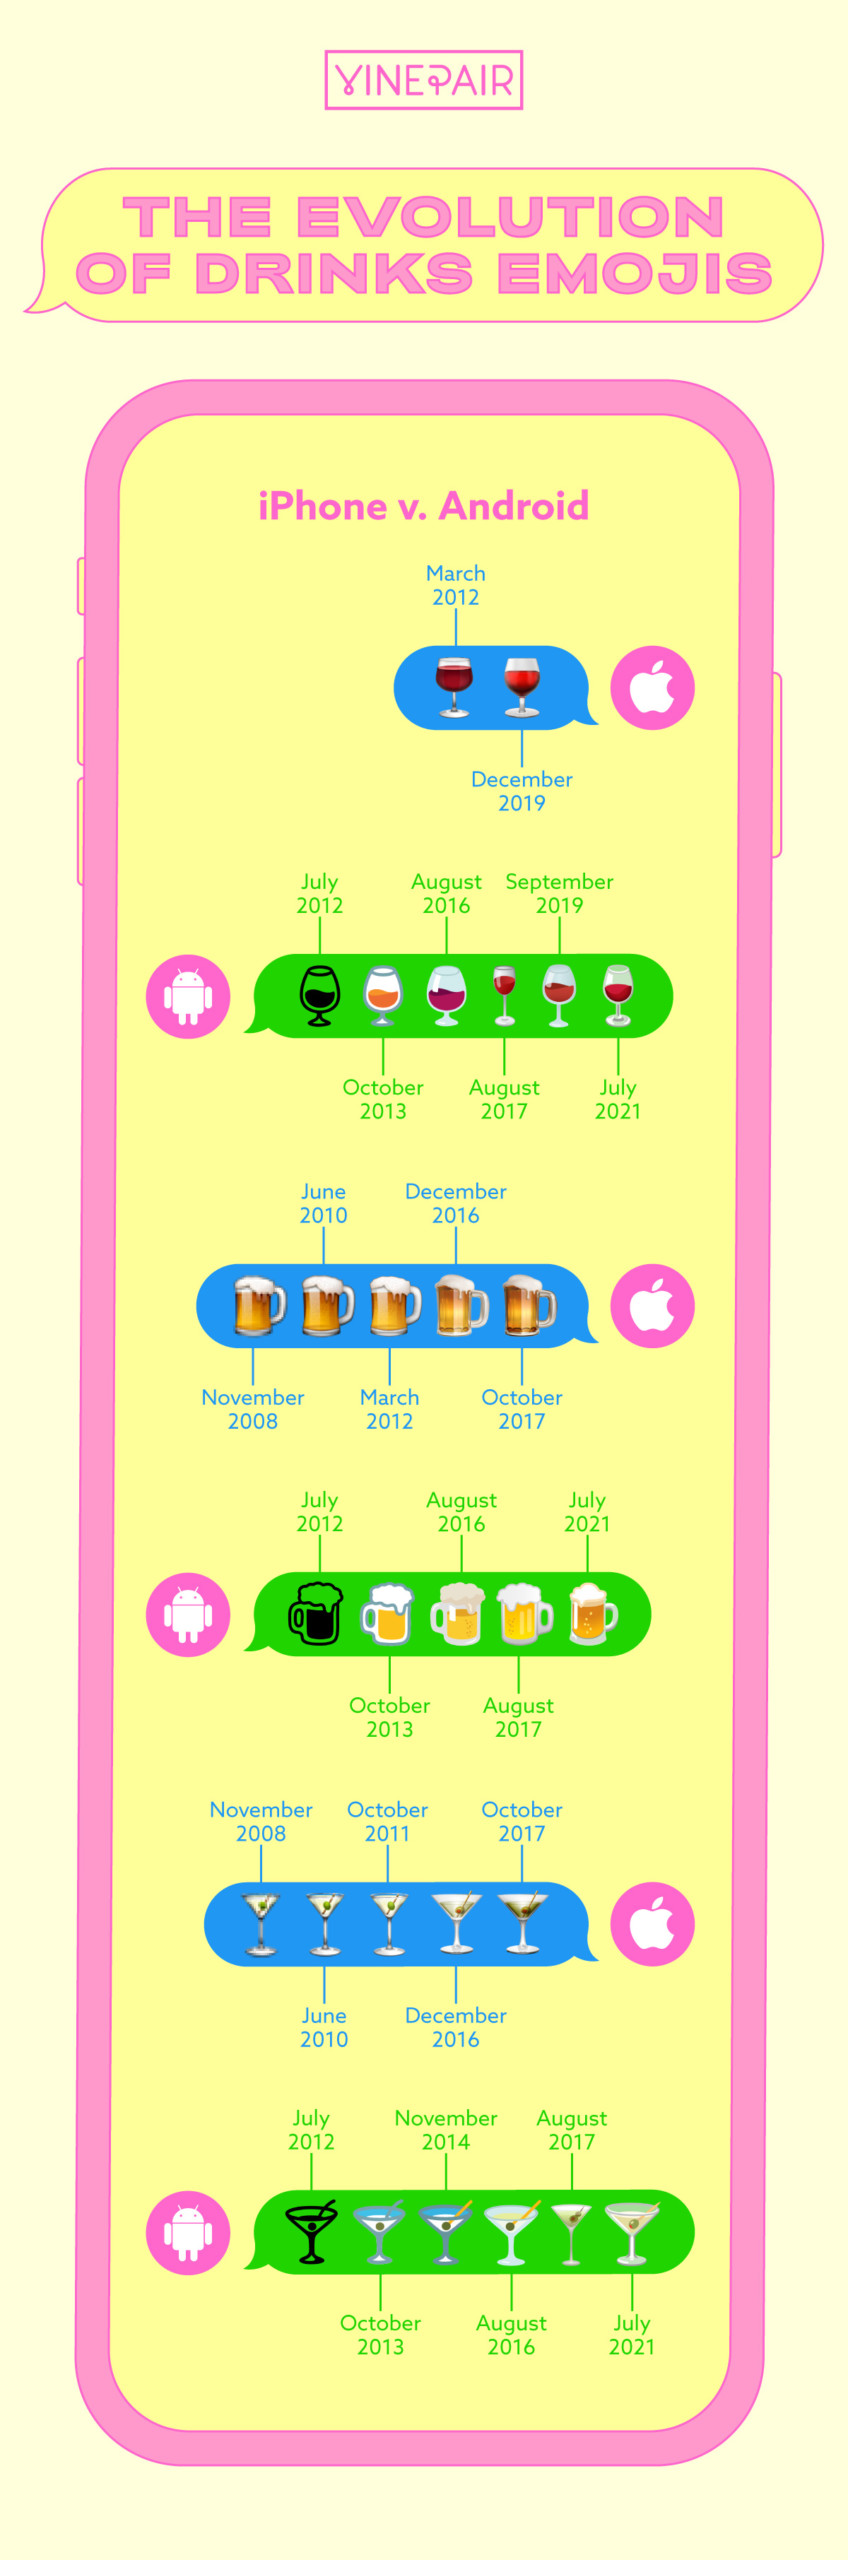 This Is The Evolution of Drinks Emojis on iPhones and Androids Since 2008